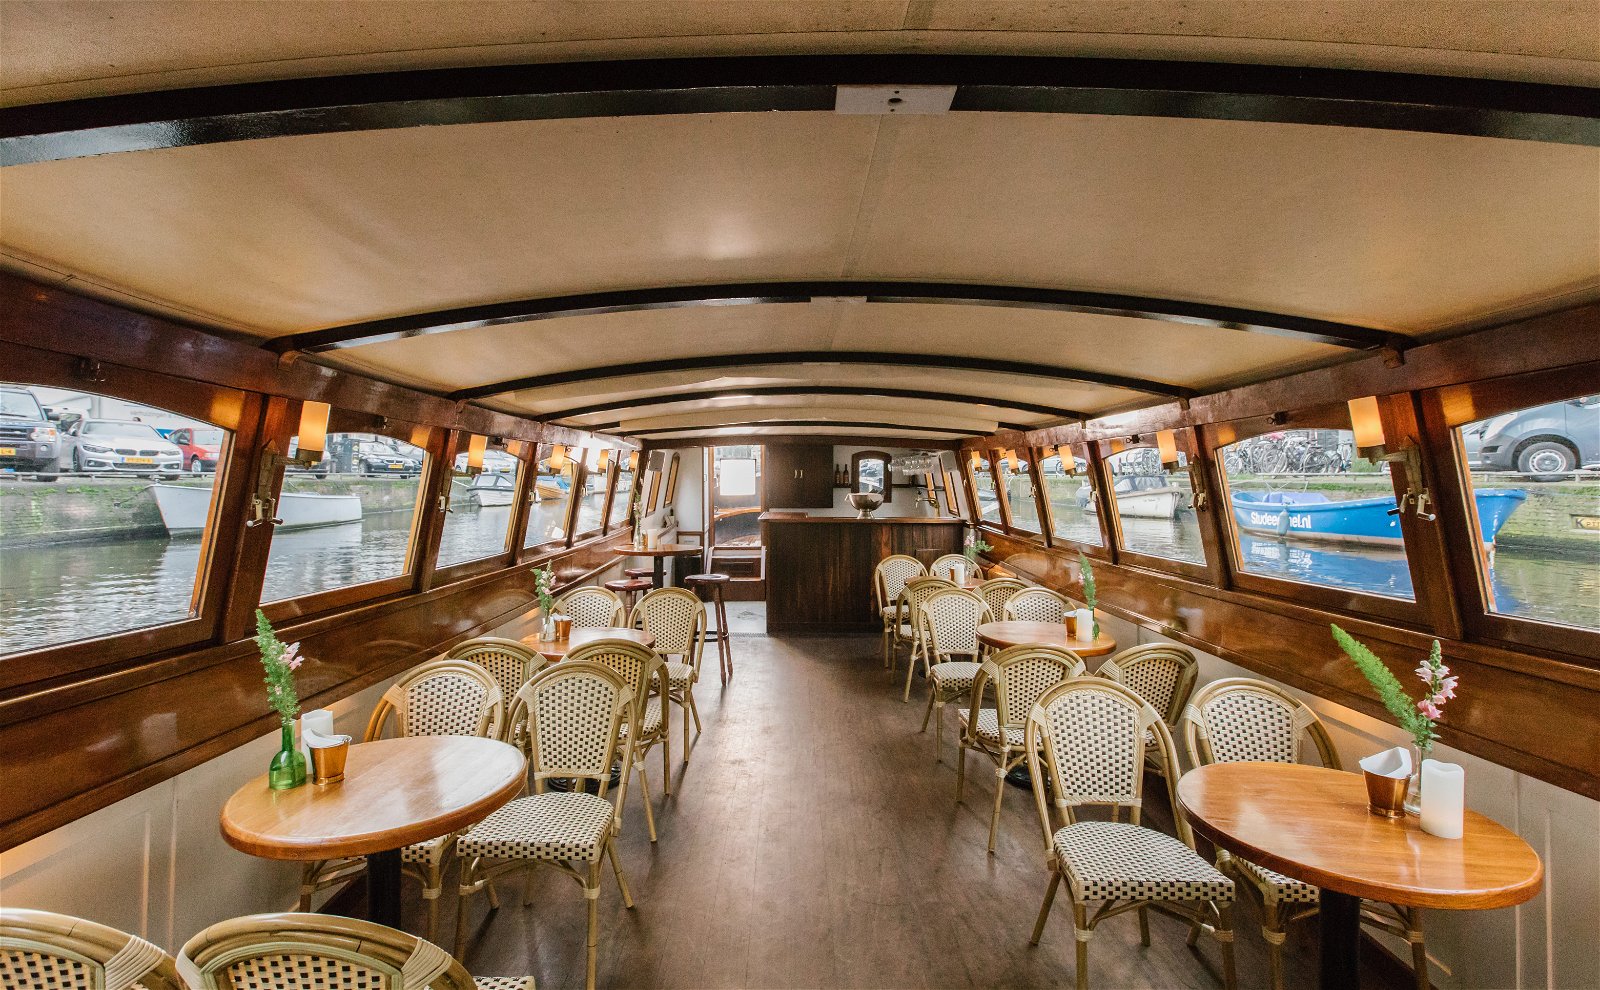 Interior large boat closed roof